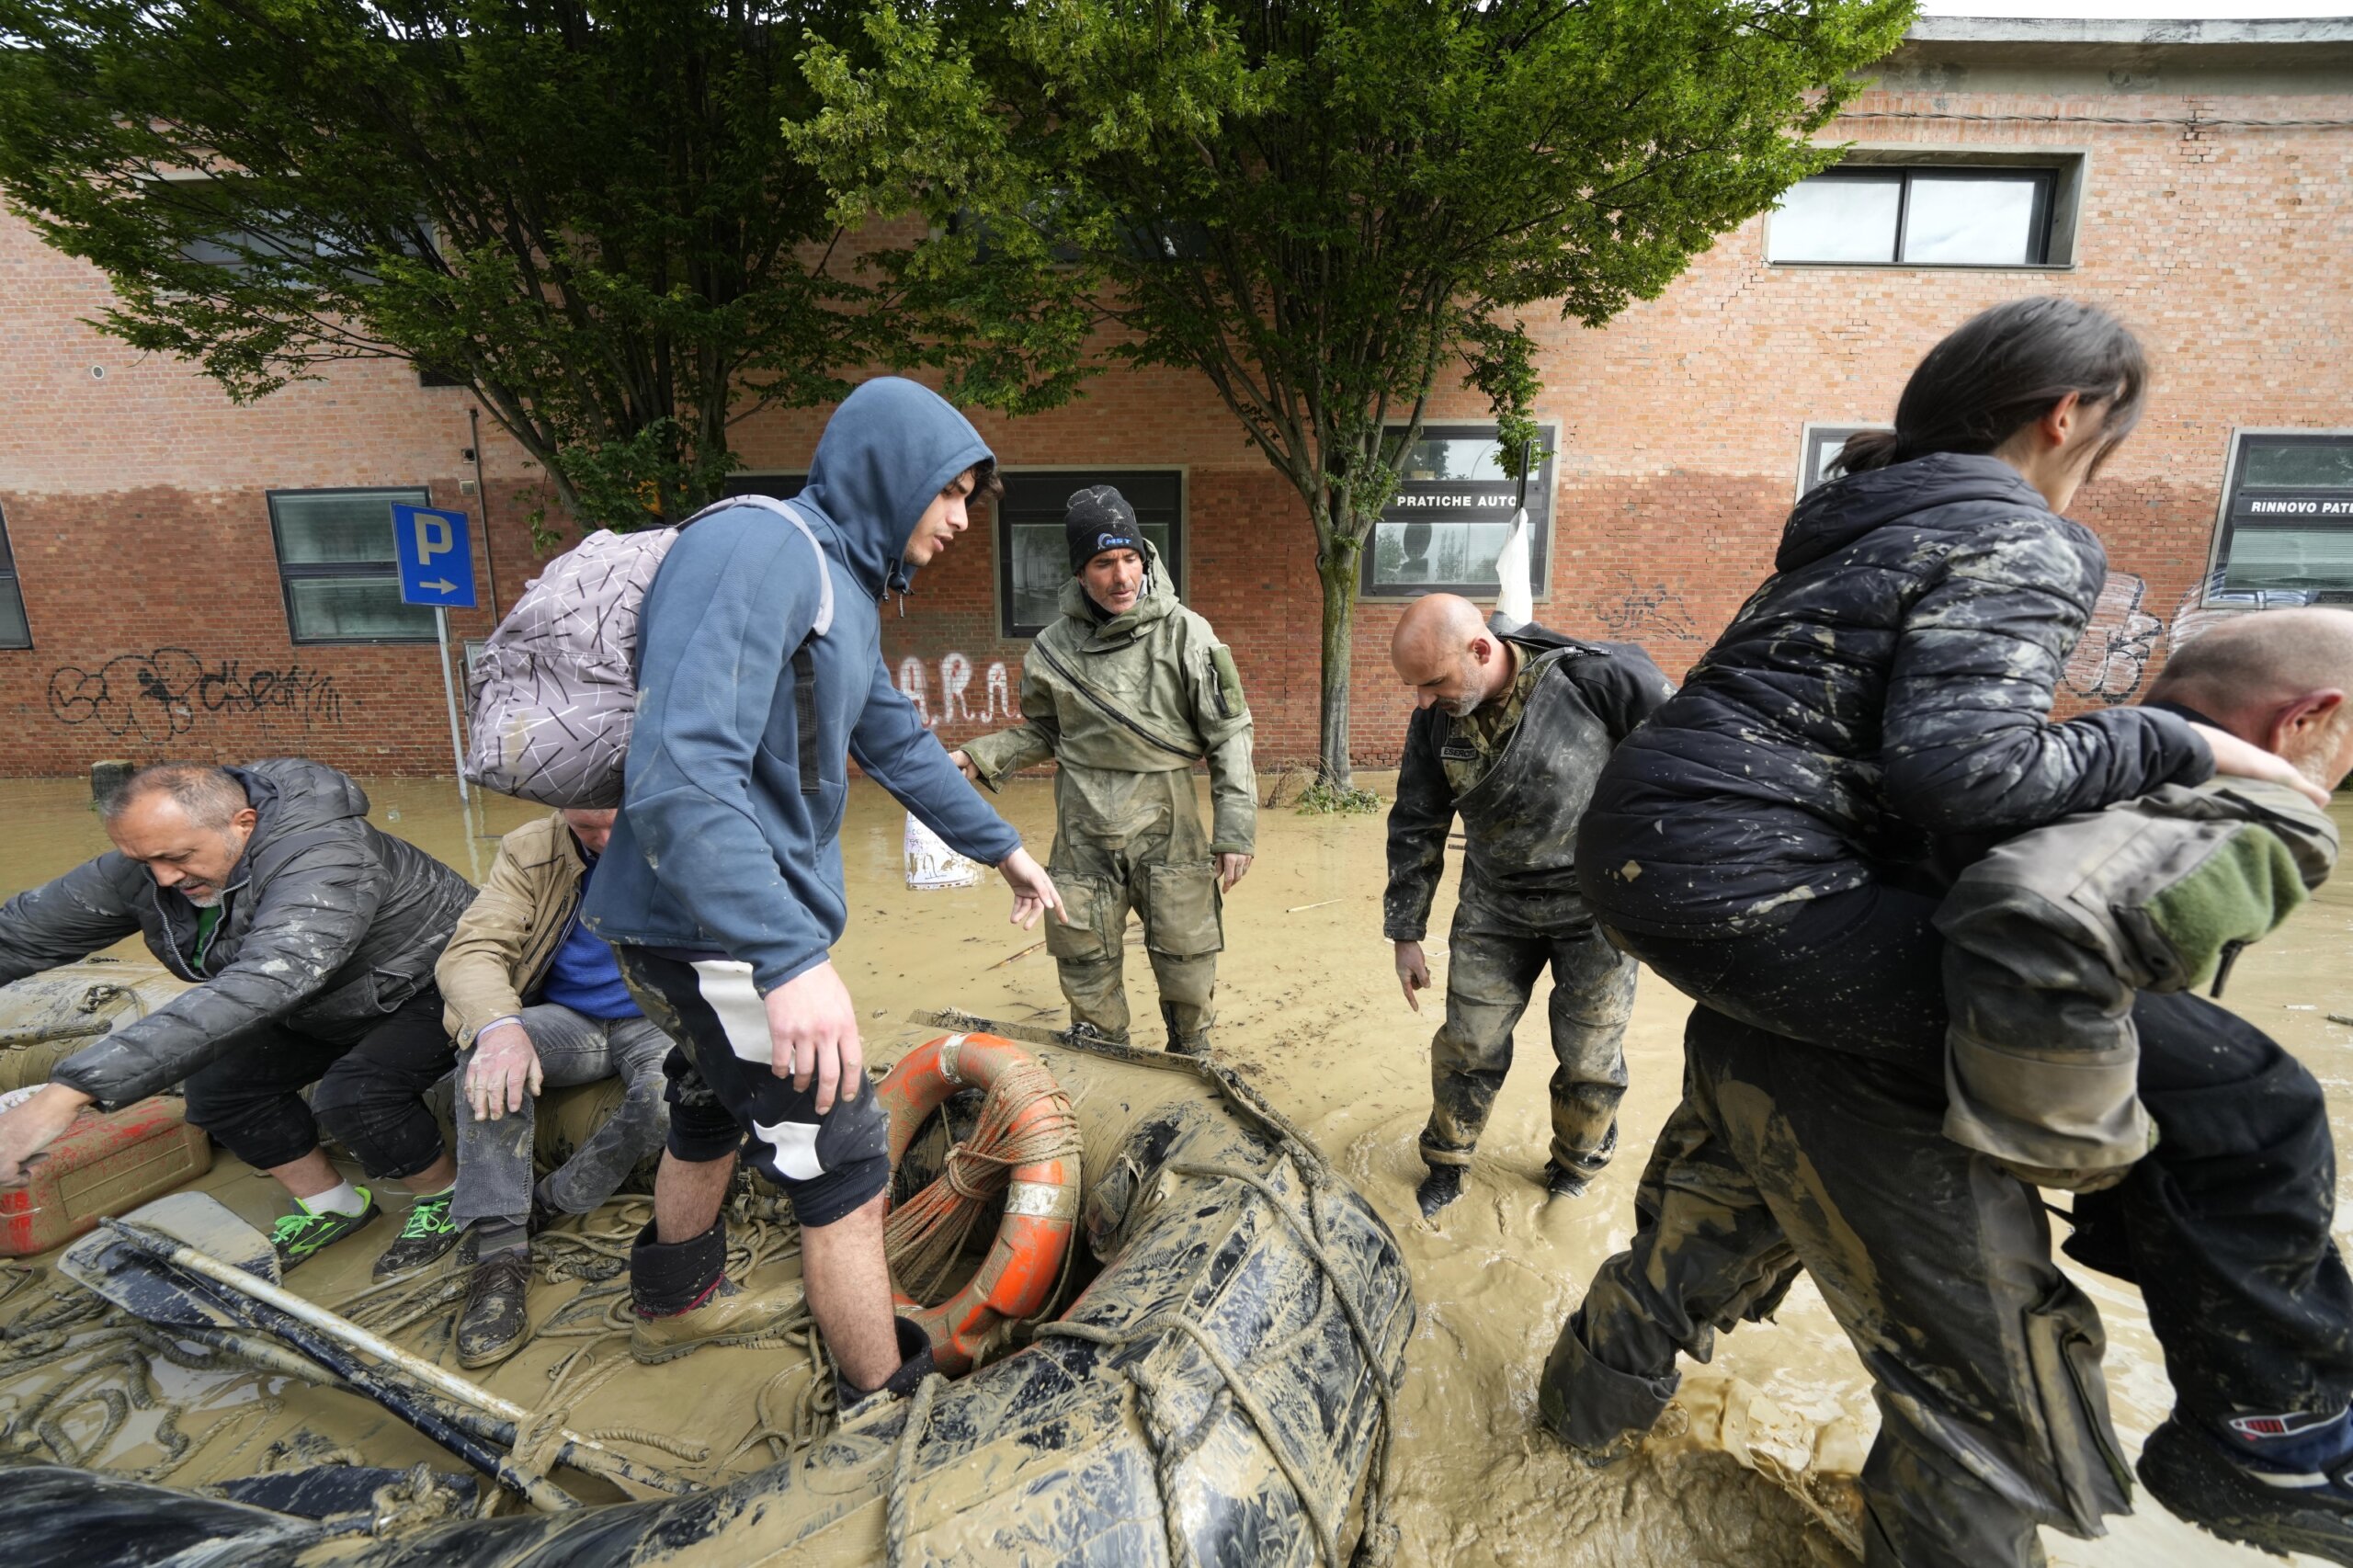 Crews work to reach Italian towns isolated by floods as toll rises to